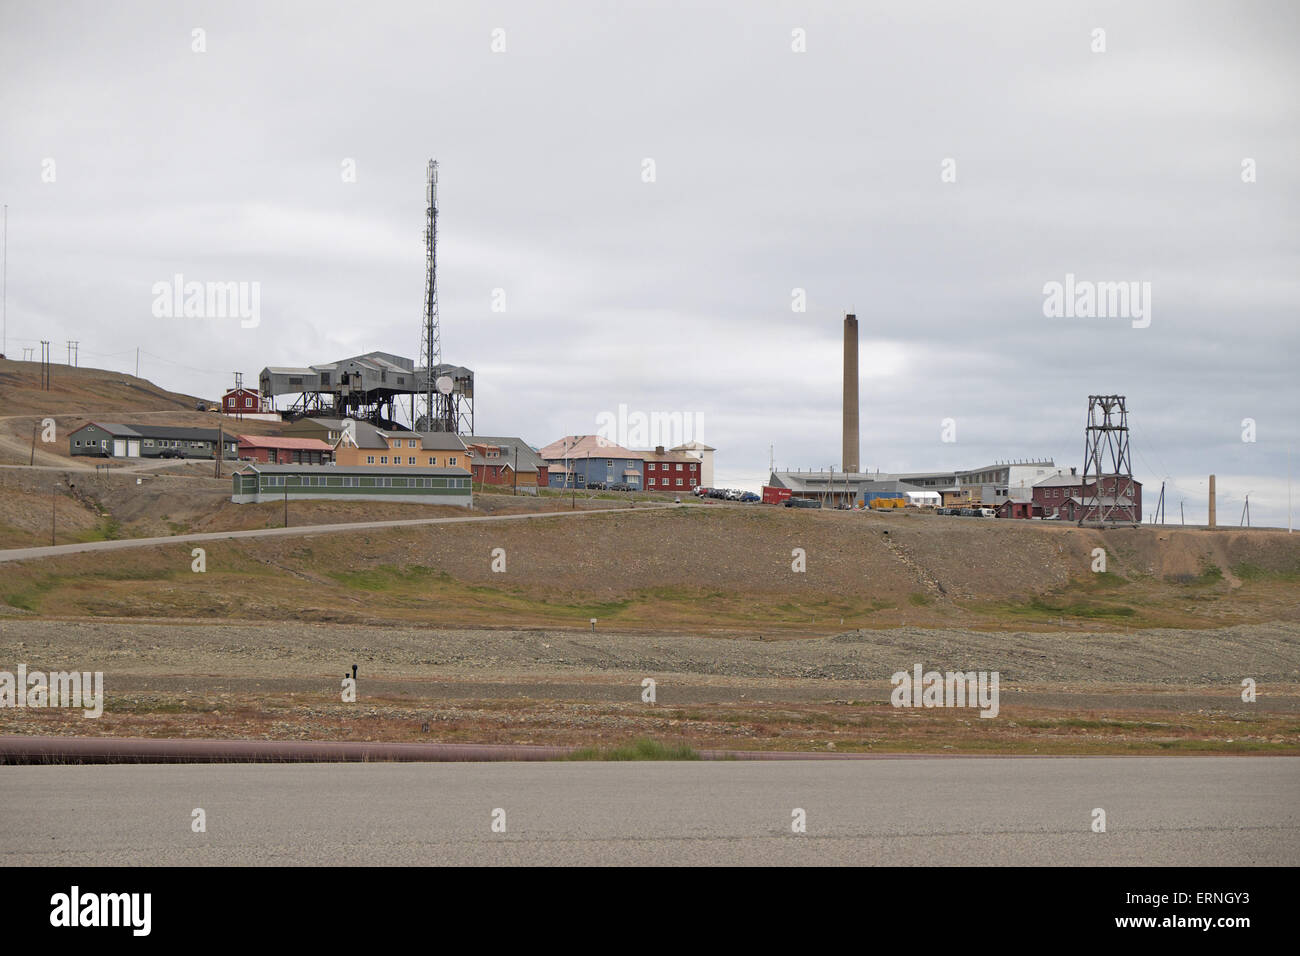 The disused aerial tramway centre looming over other buildings, Longyearbyen, Spitzbergen, Svalbard. Stock Photo